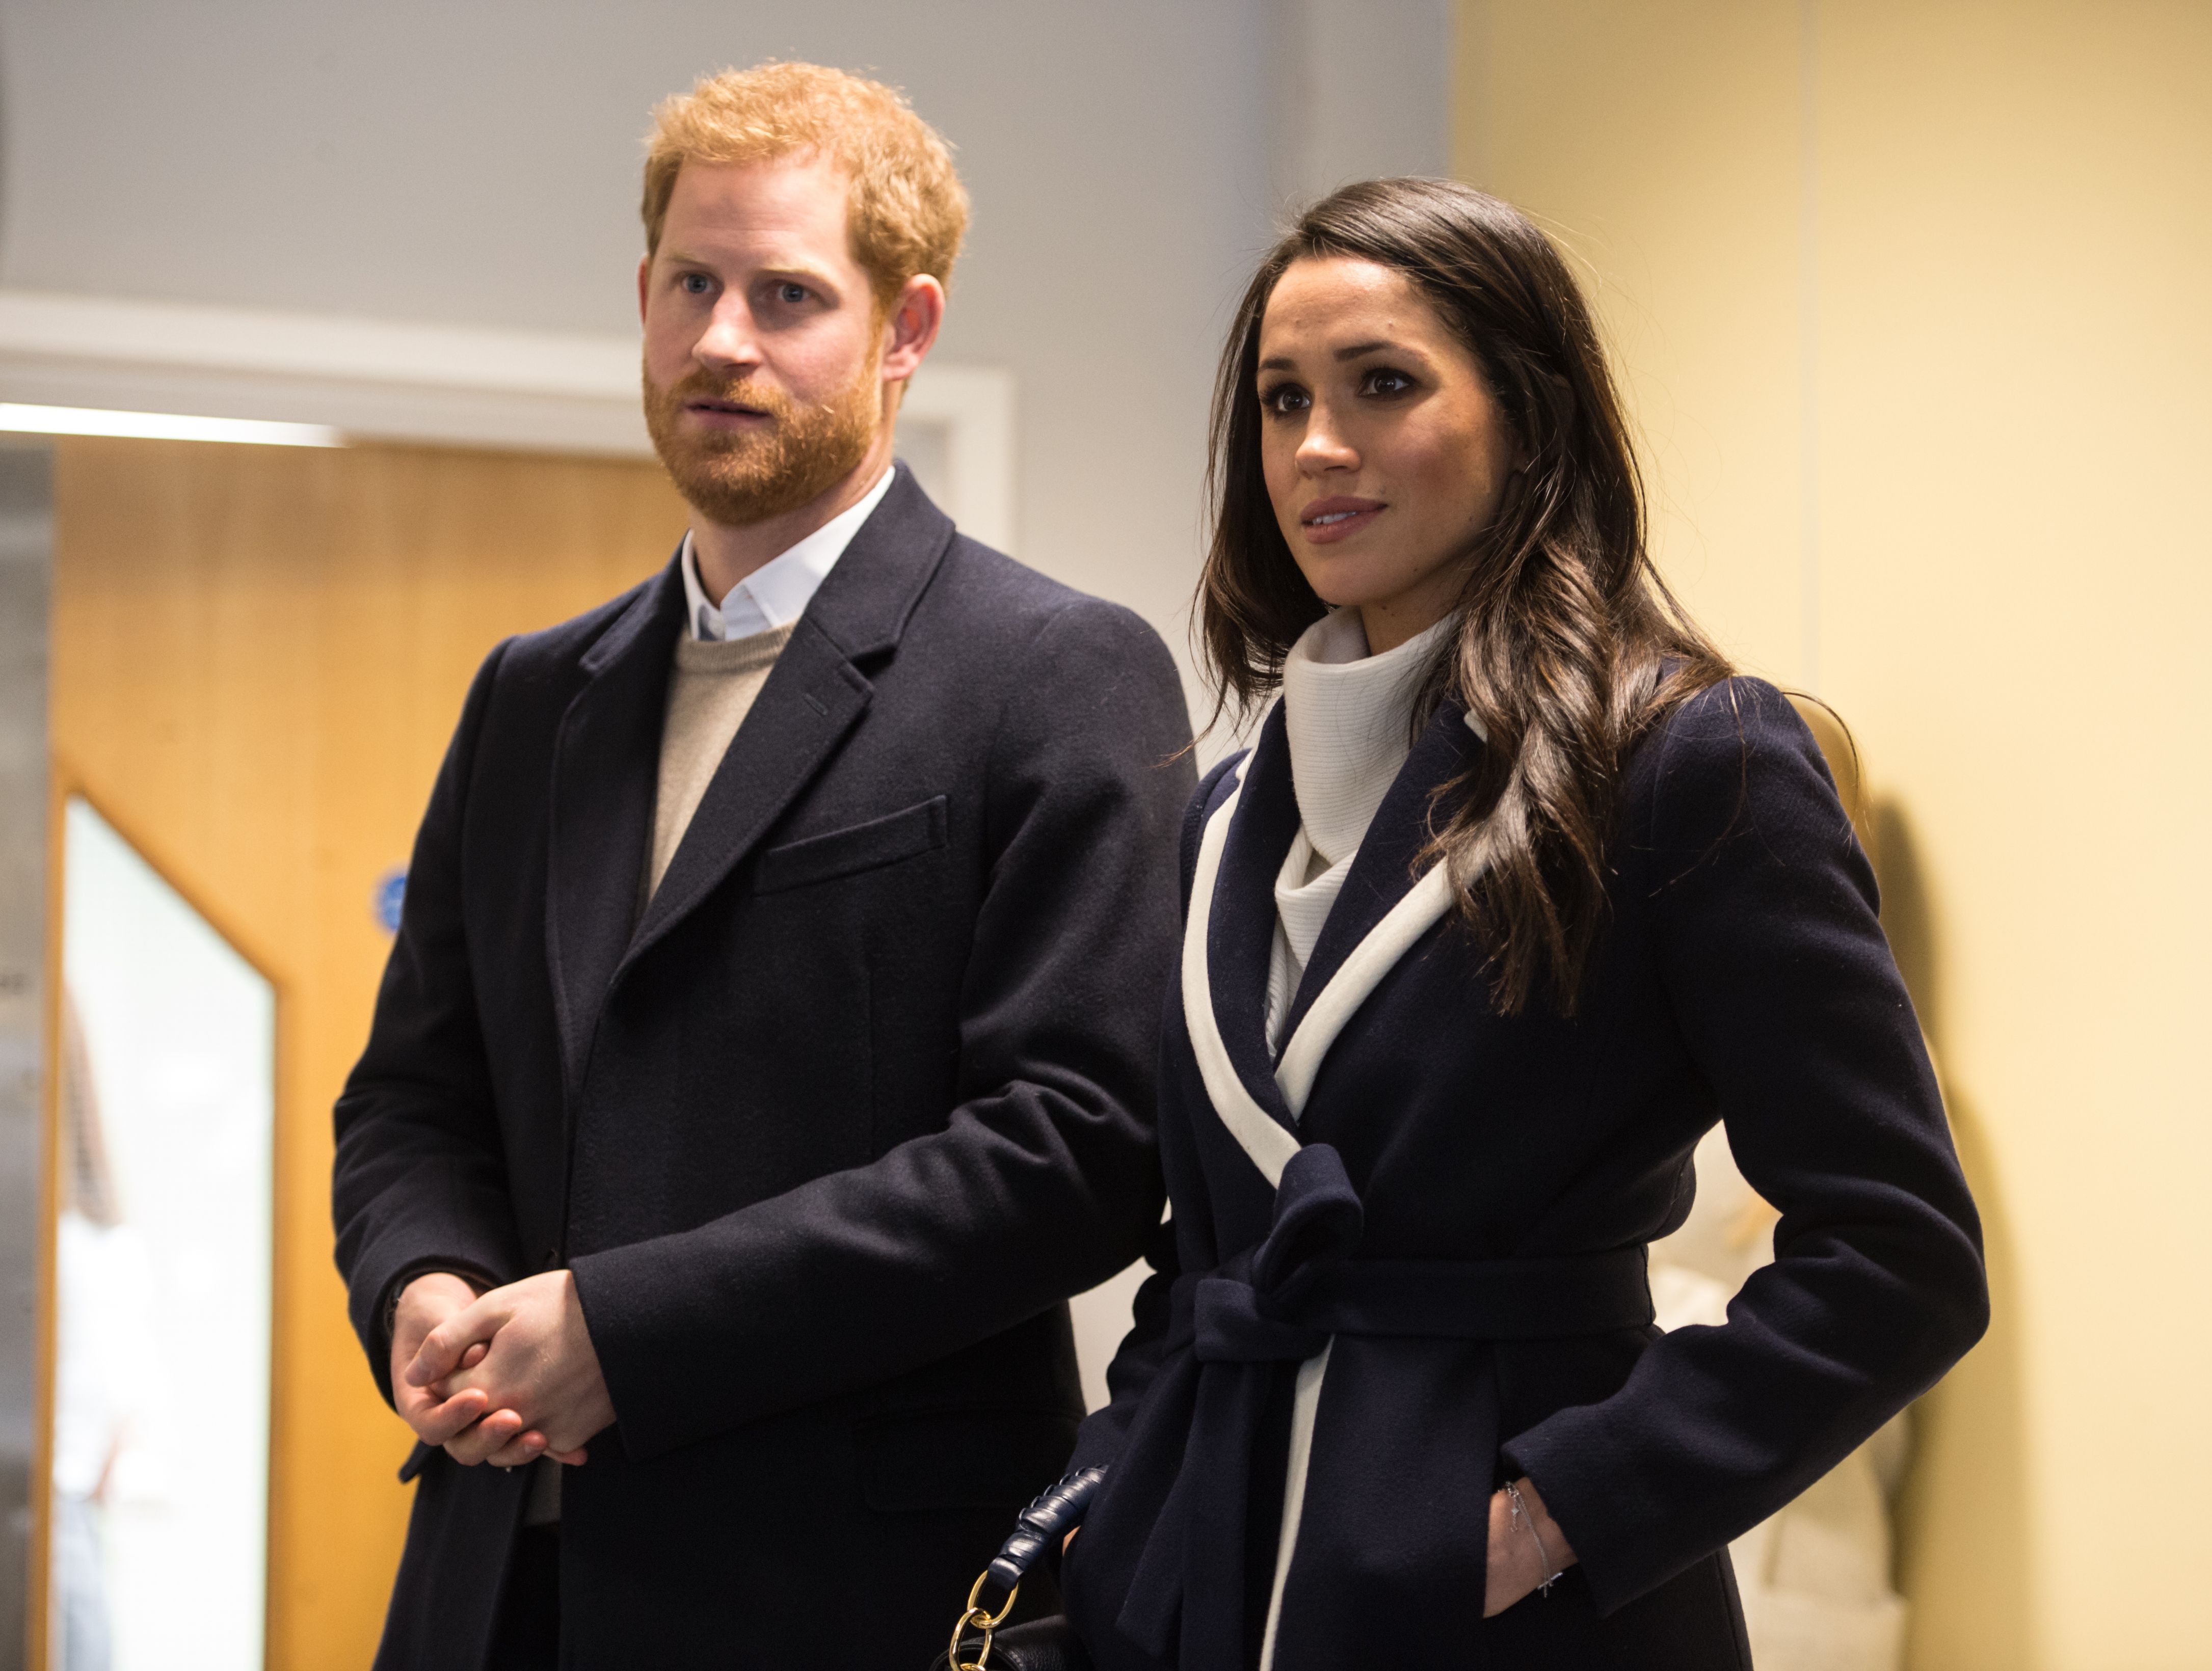 Prince Harry and Meghan Markle visit Nechells Wellbeing Centre in Birmingham, England on March 8, 2018 | Source: Getty Images